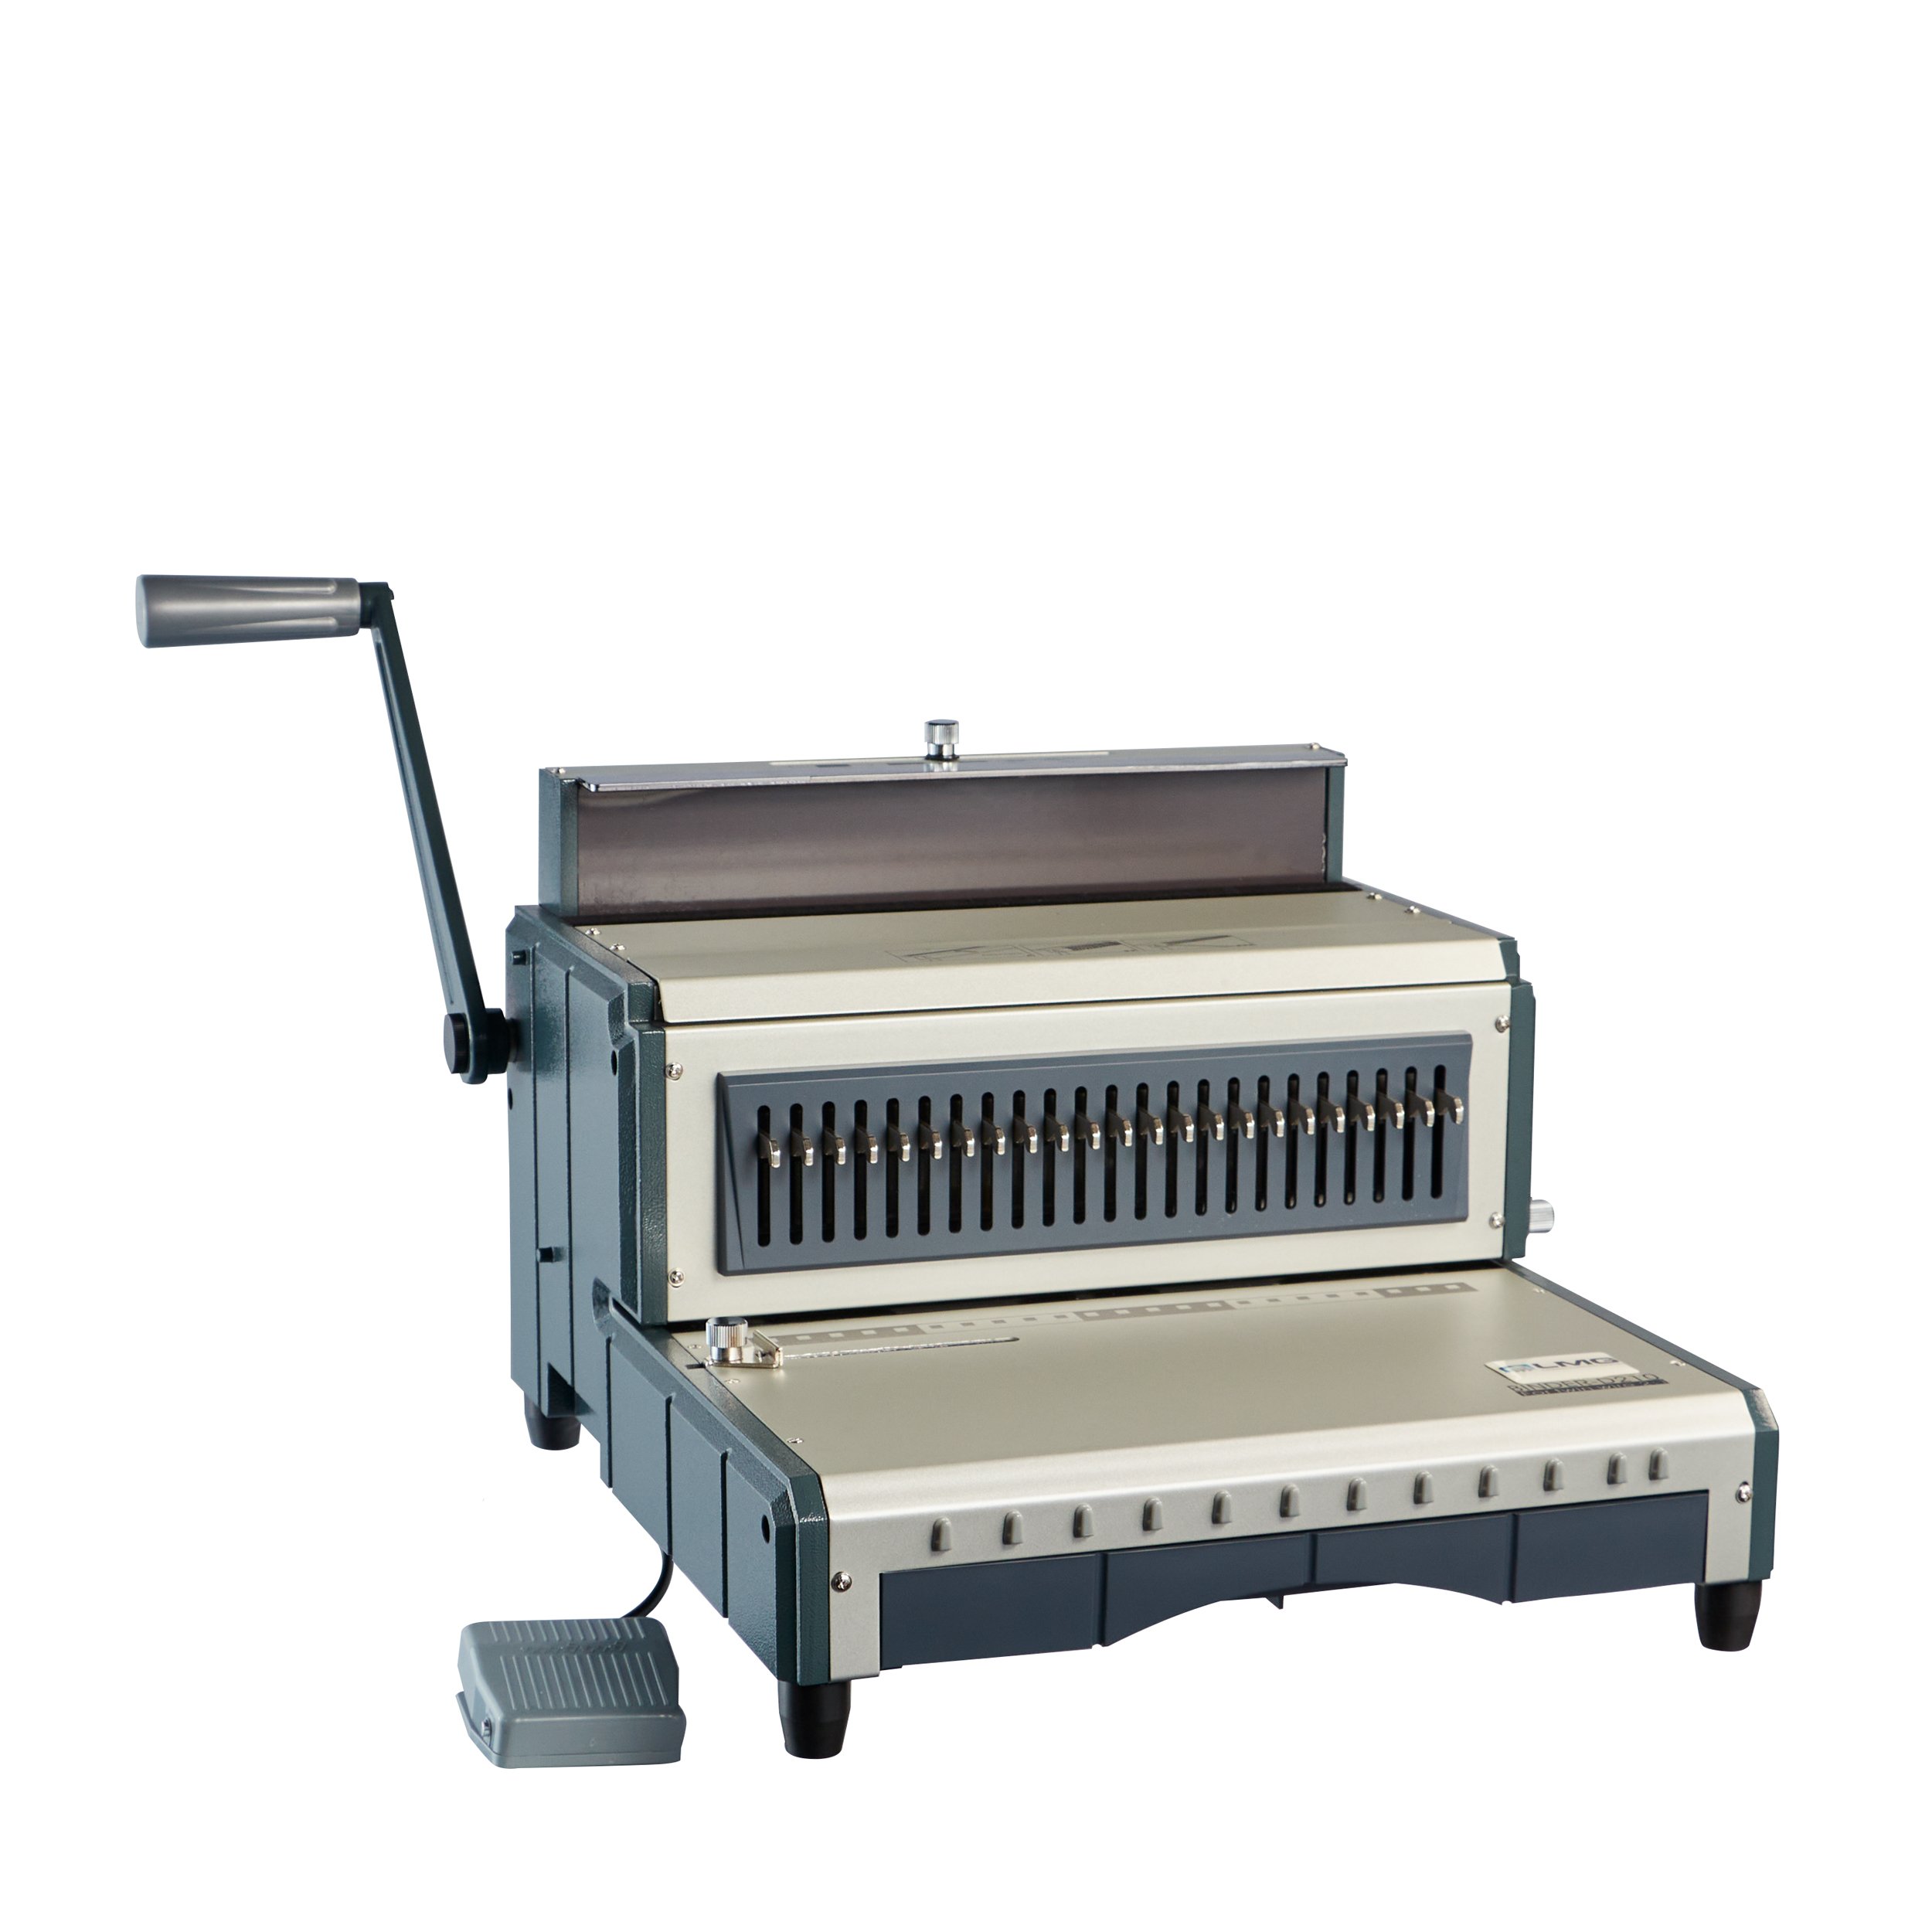 Corner punch Warrior M70 for laminating pouches, paper, cover sheets